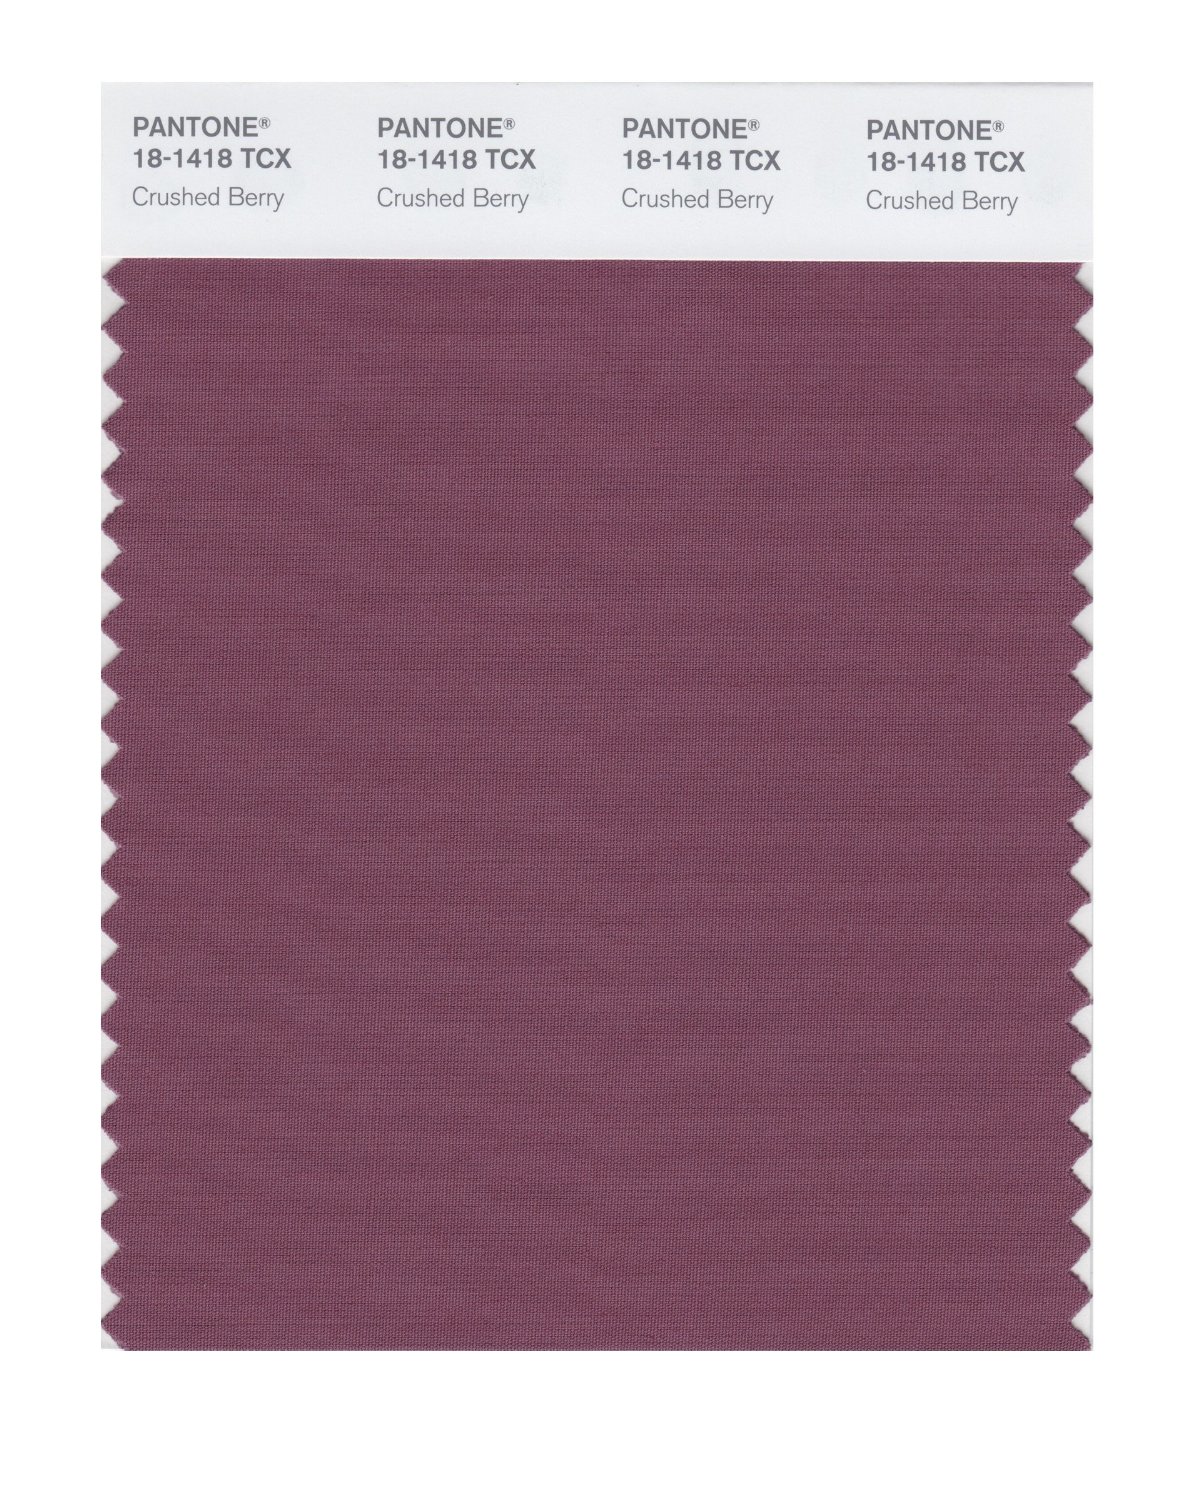 Pantone Cotton Swatch 18-1418 Crushed Berry